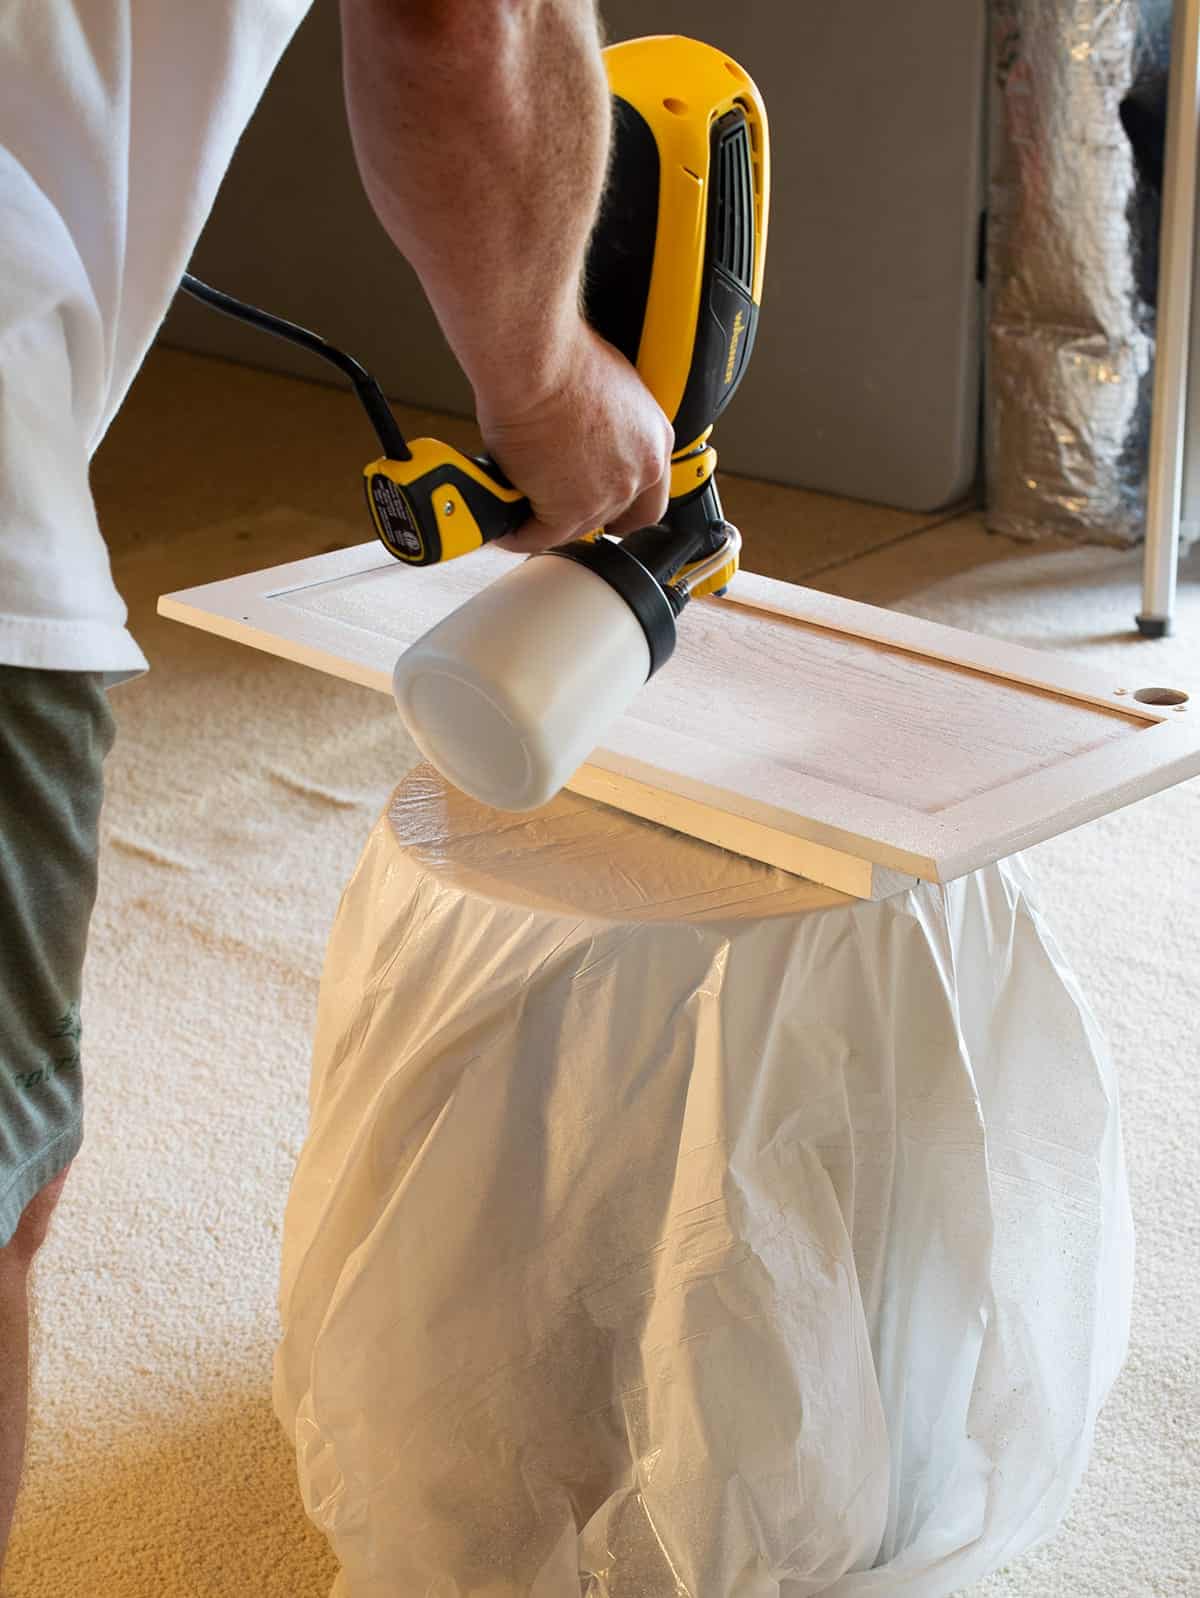 Man using a paint sprayer to paint kitchen cabinet door on raised plastic covered table.